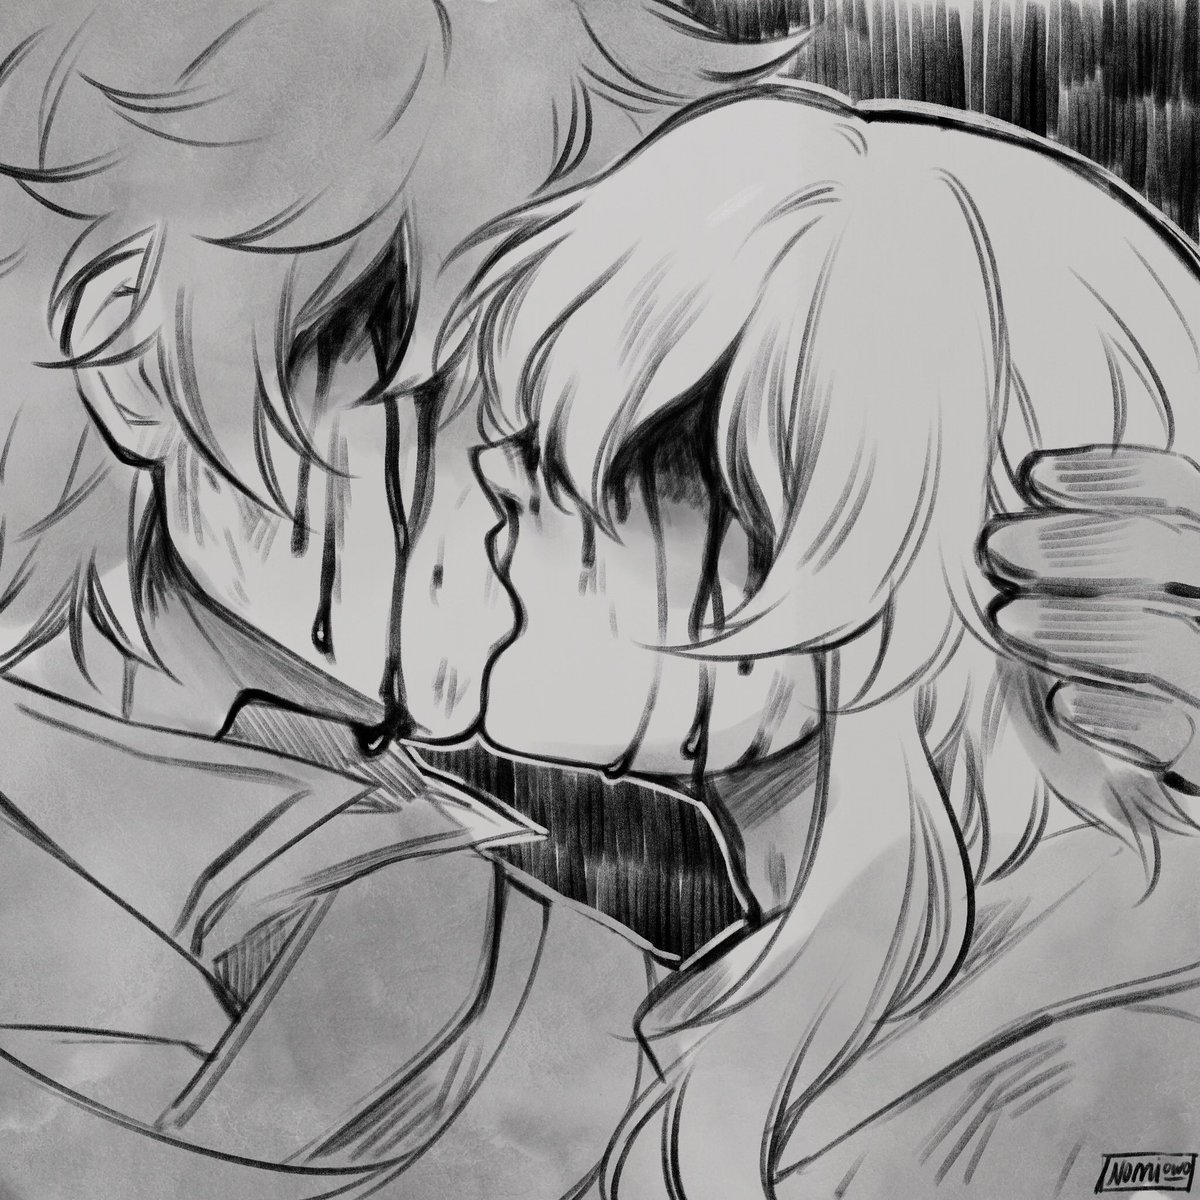 chilumi kiss because one is running out of time (if you get this reference please cry with me) 